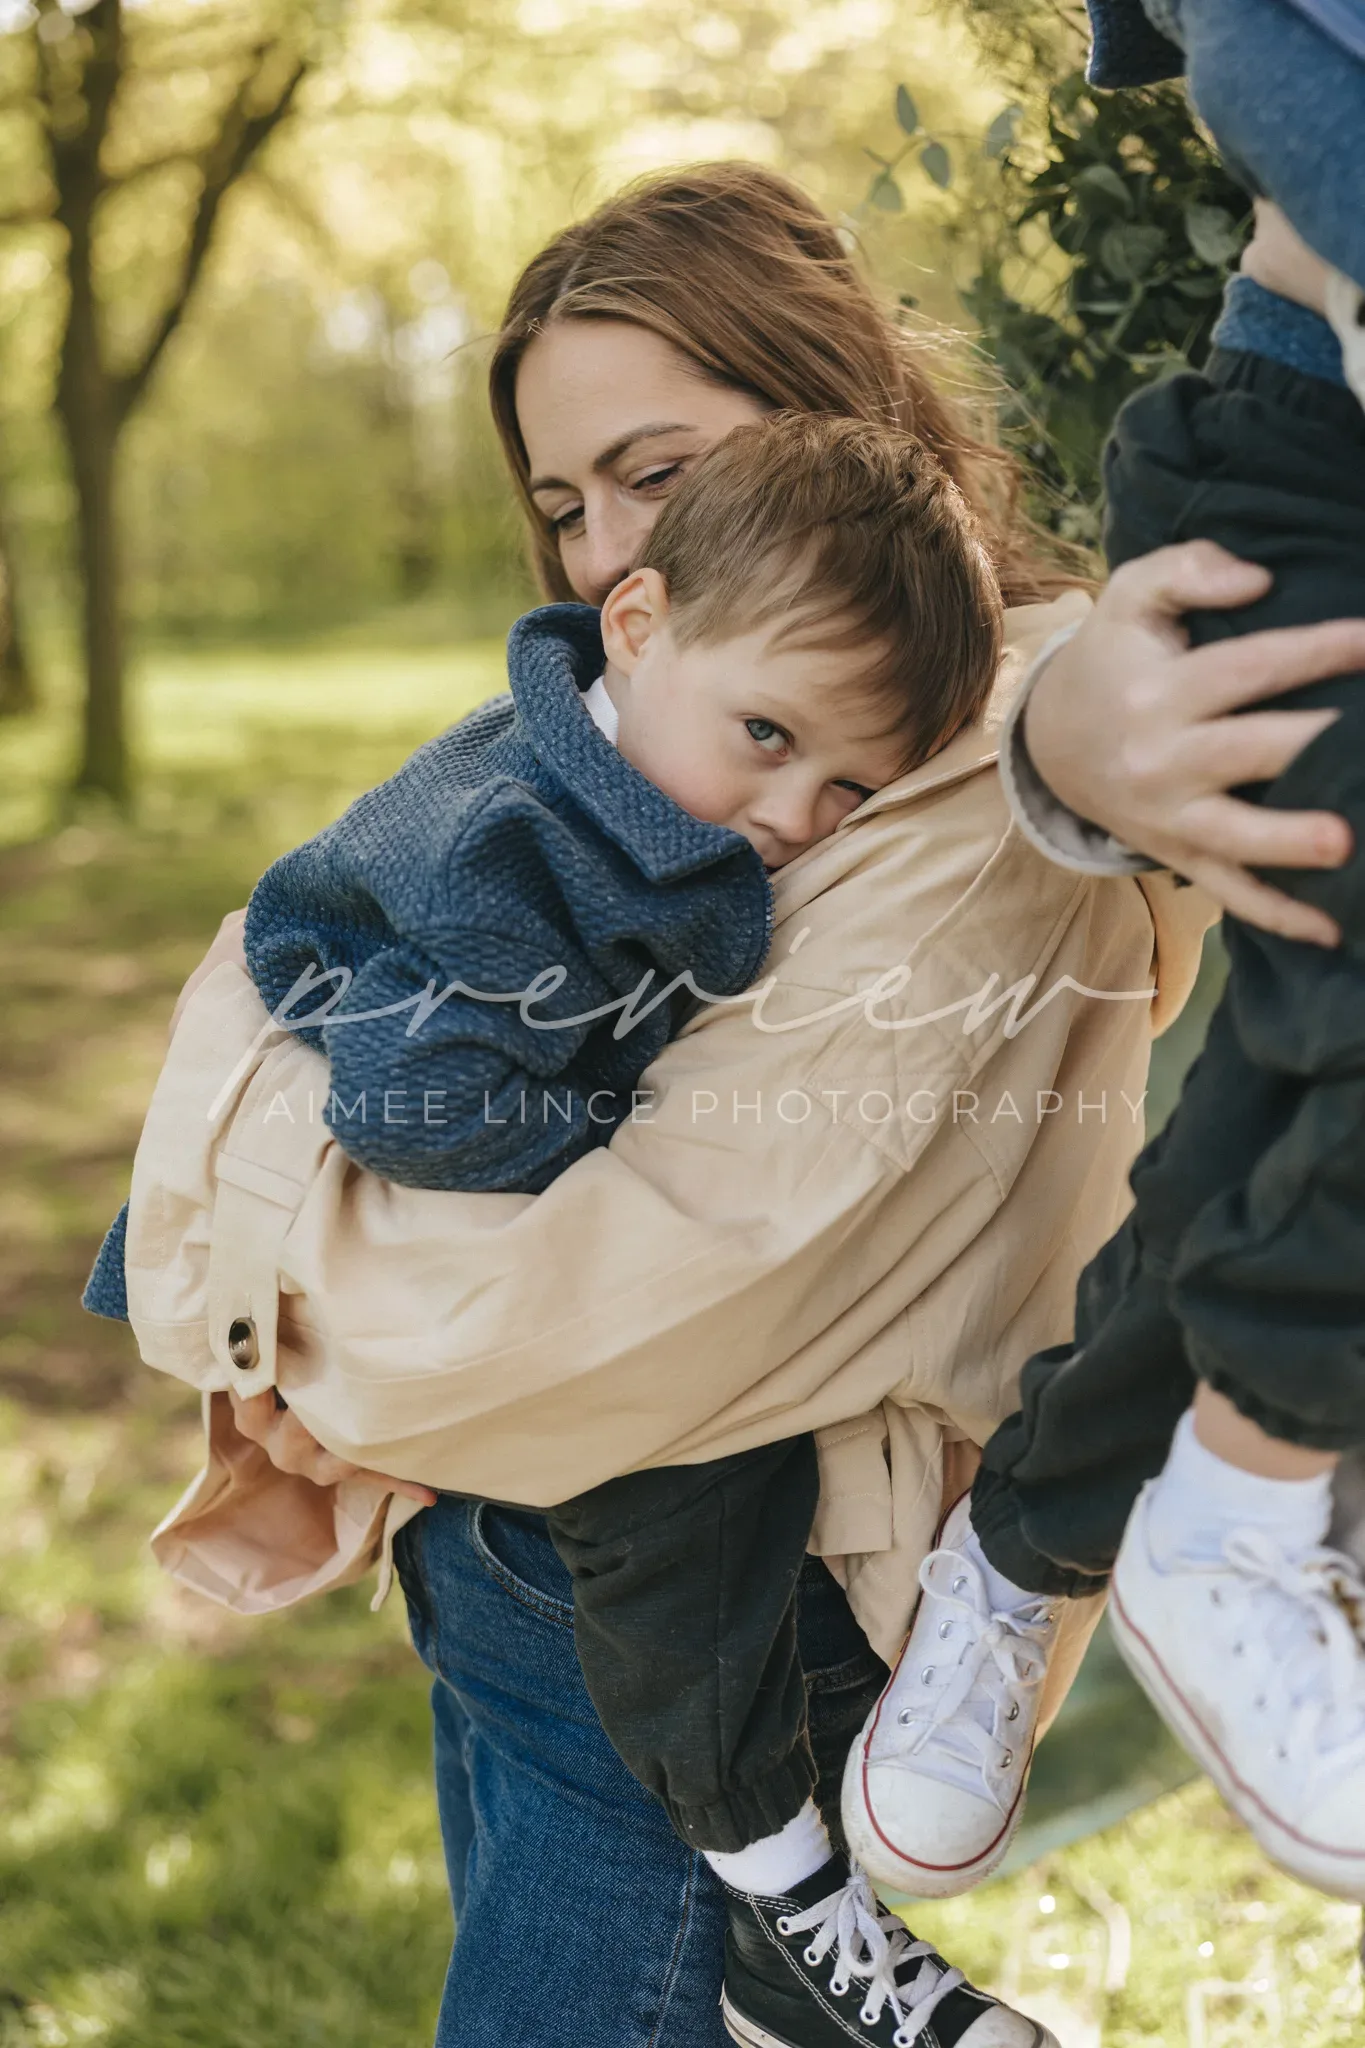 A mother lovingly holds her young son in a sunny park. the boy, dressed in a blue sweater and jeans, rests his head on his mother's shoulder while she, wearing a beige jacket, embraces him warmly. trees with green leaves fill the background.